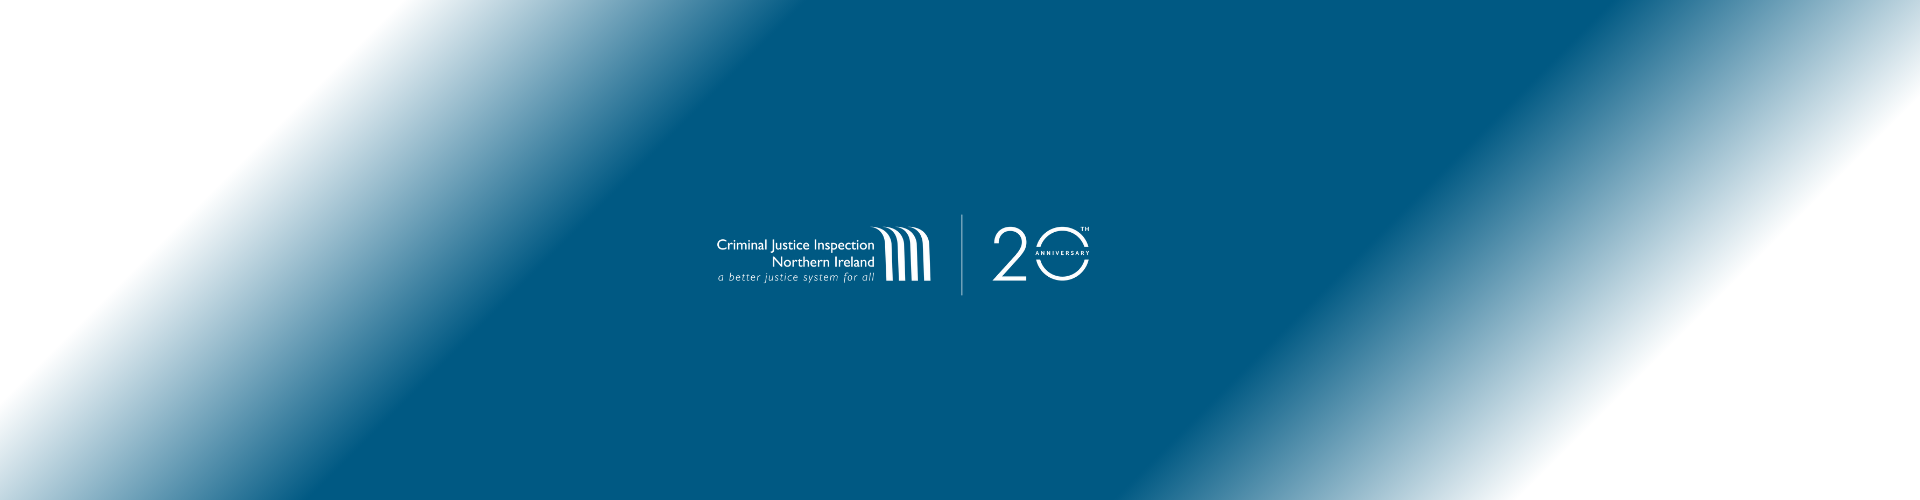 Criminal Justice Inspection 20th Anniversary logo